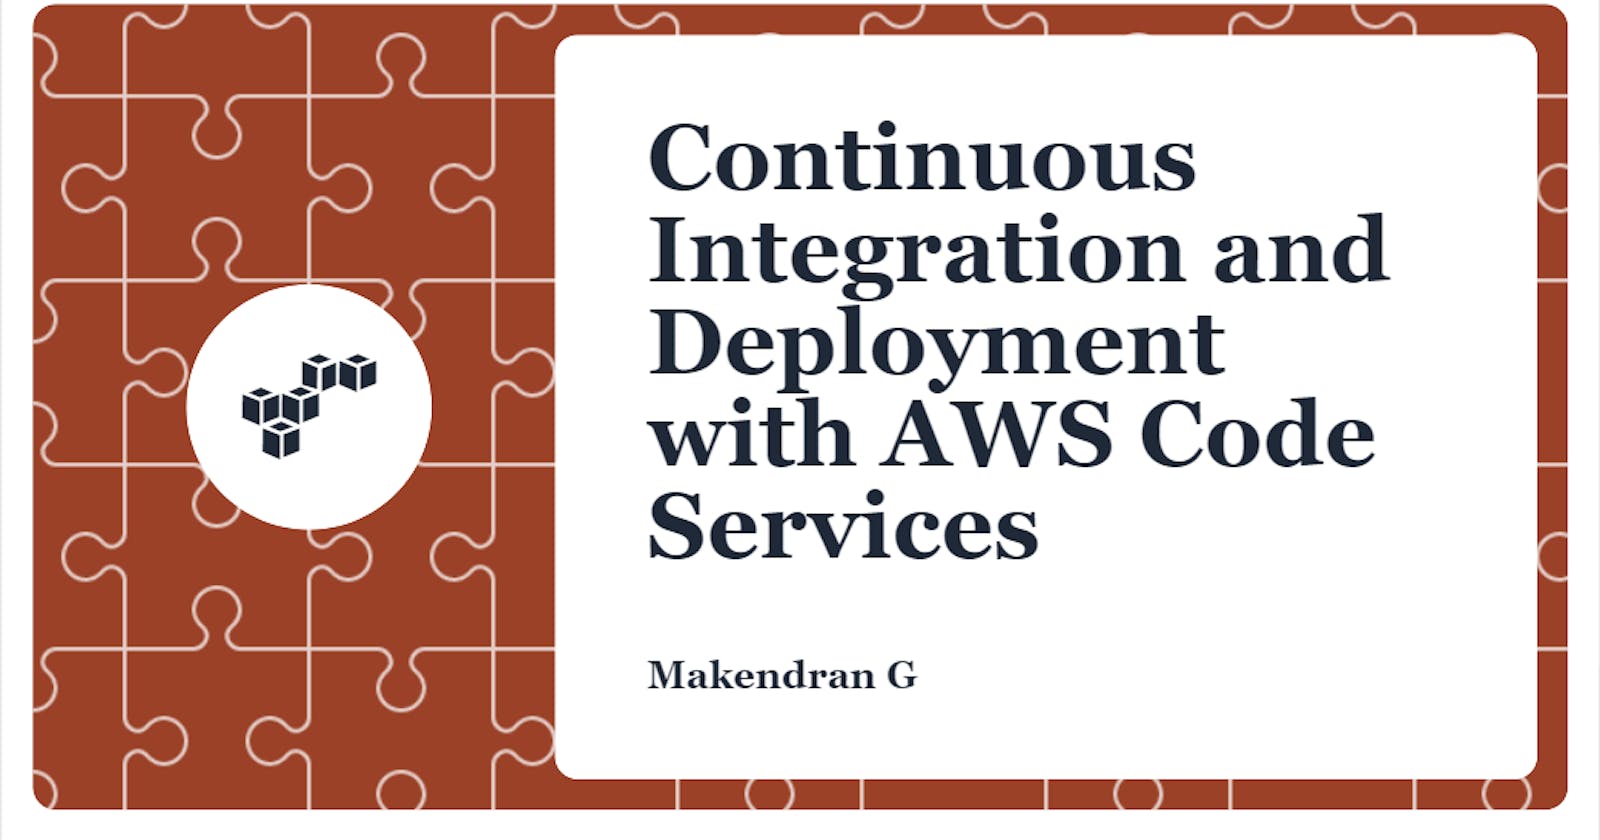 Continuous integration and deployment with AWS code services